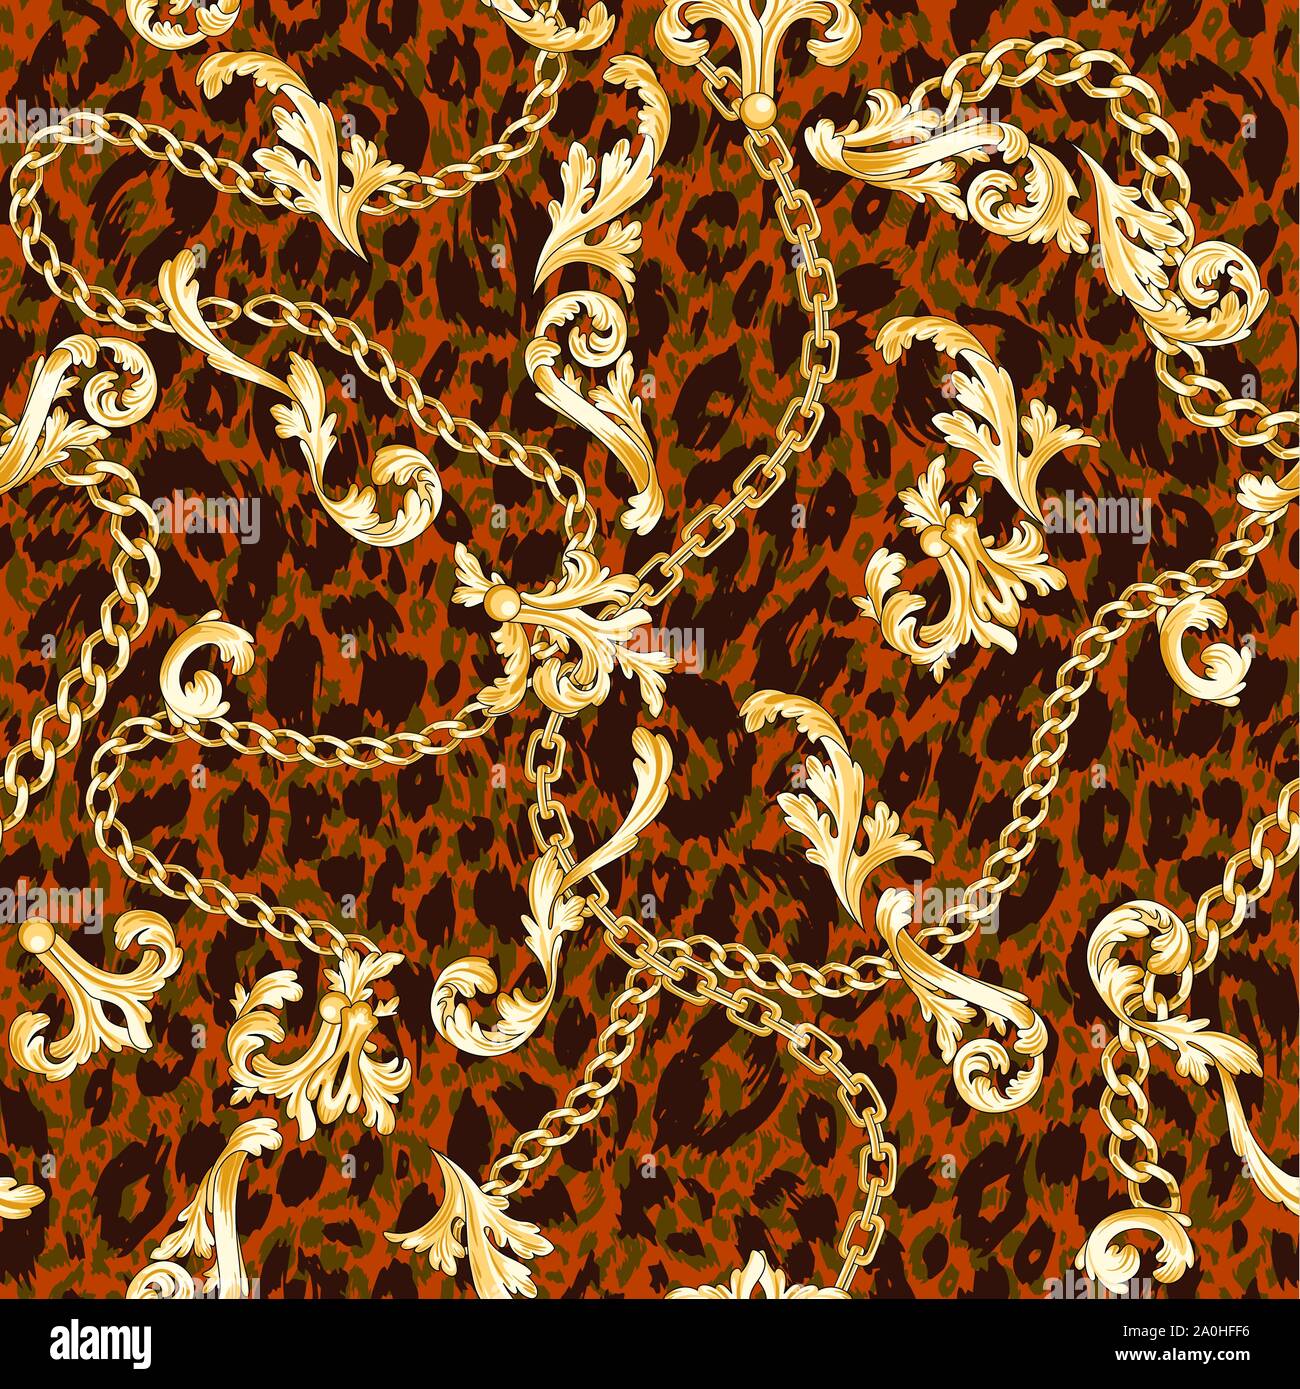 Gold flourishes and chains Stock Vector